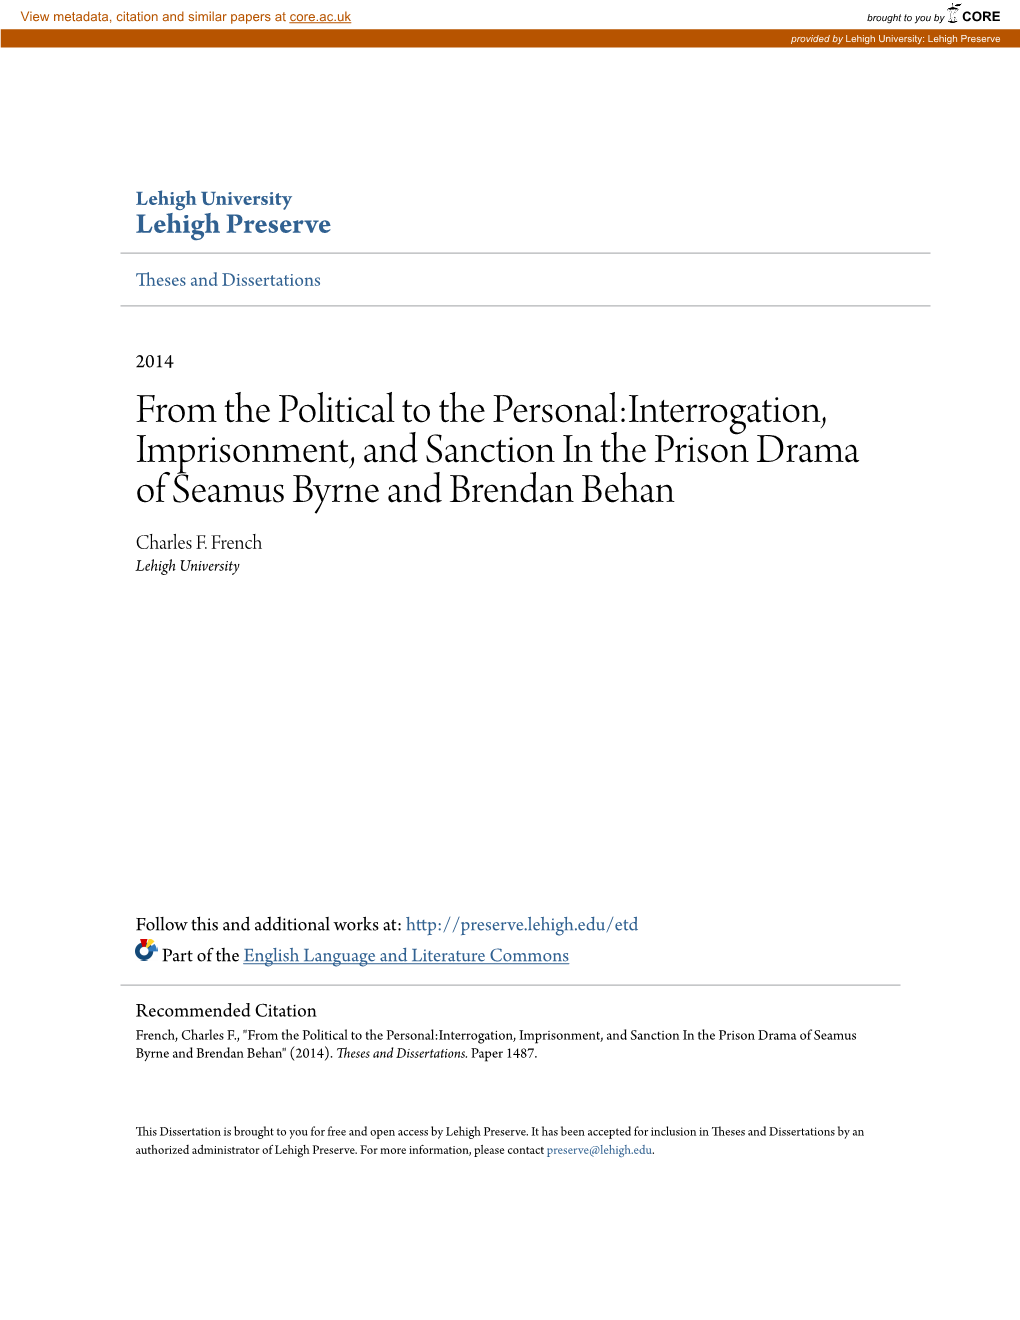 From the Political to the Personal:Interrogation, Imprisonment, and Sanction in the Prison Drama of Seamus Byrne and Brendan Behan Charles F